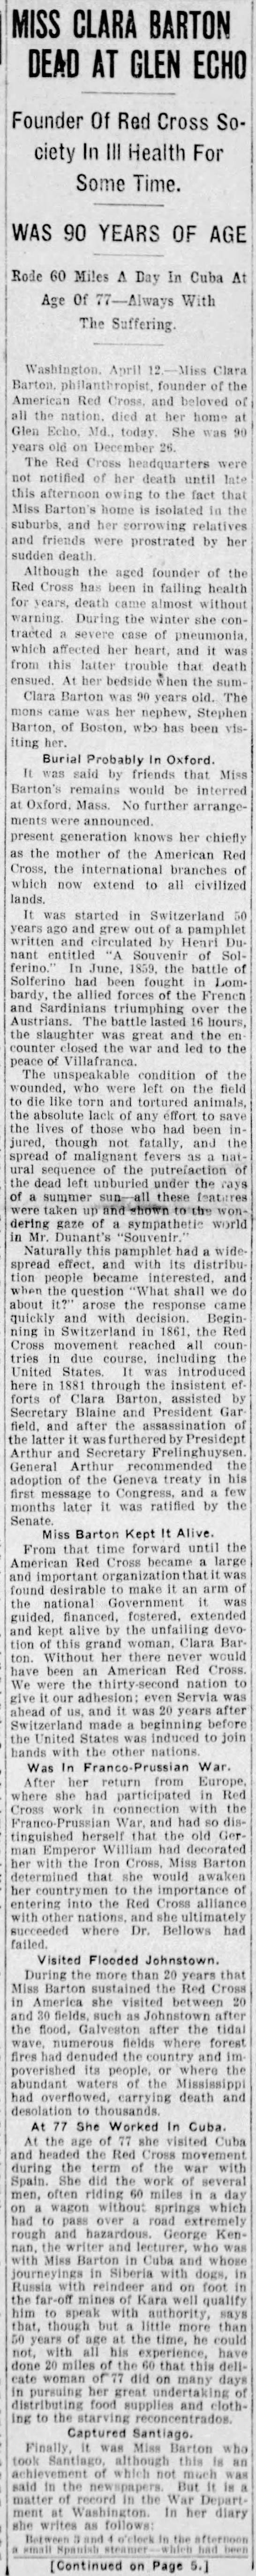 Excerpt from Clara Barton obituary printed in Baltimore paper on April 12, 1912, day of her death - 